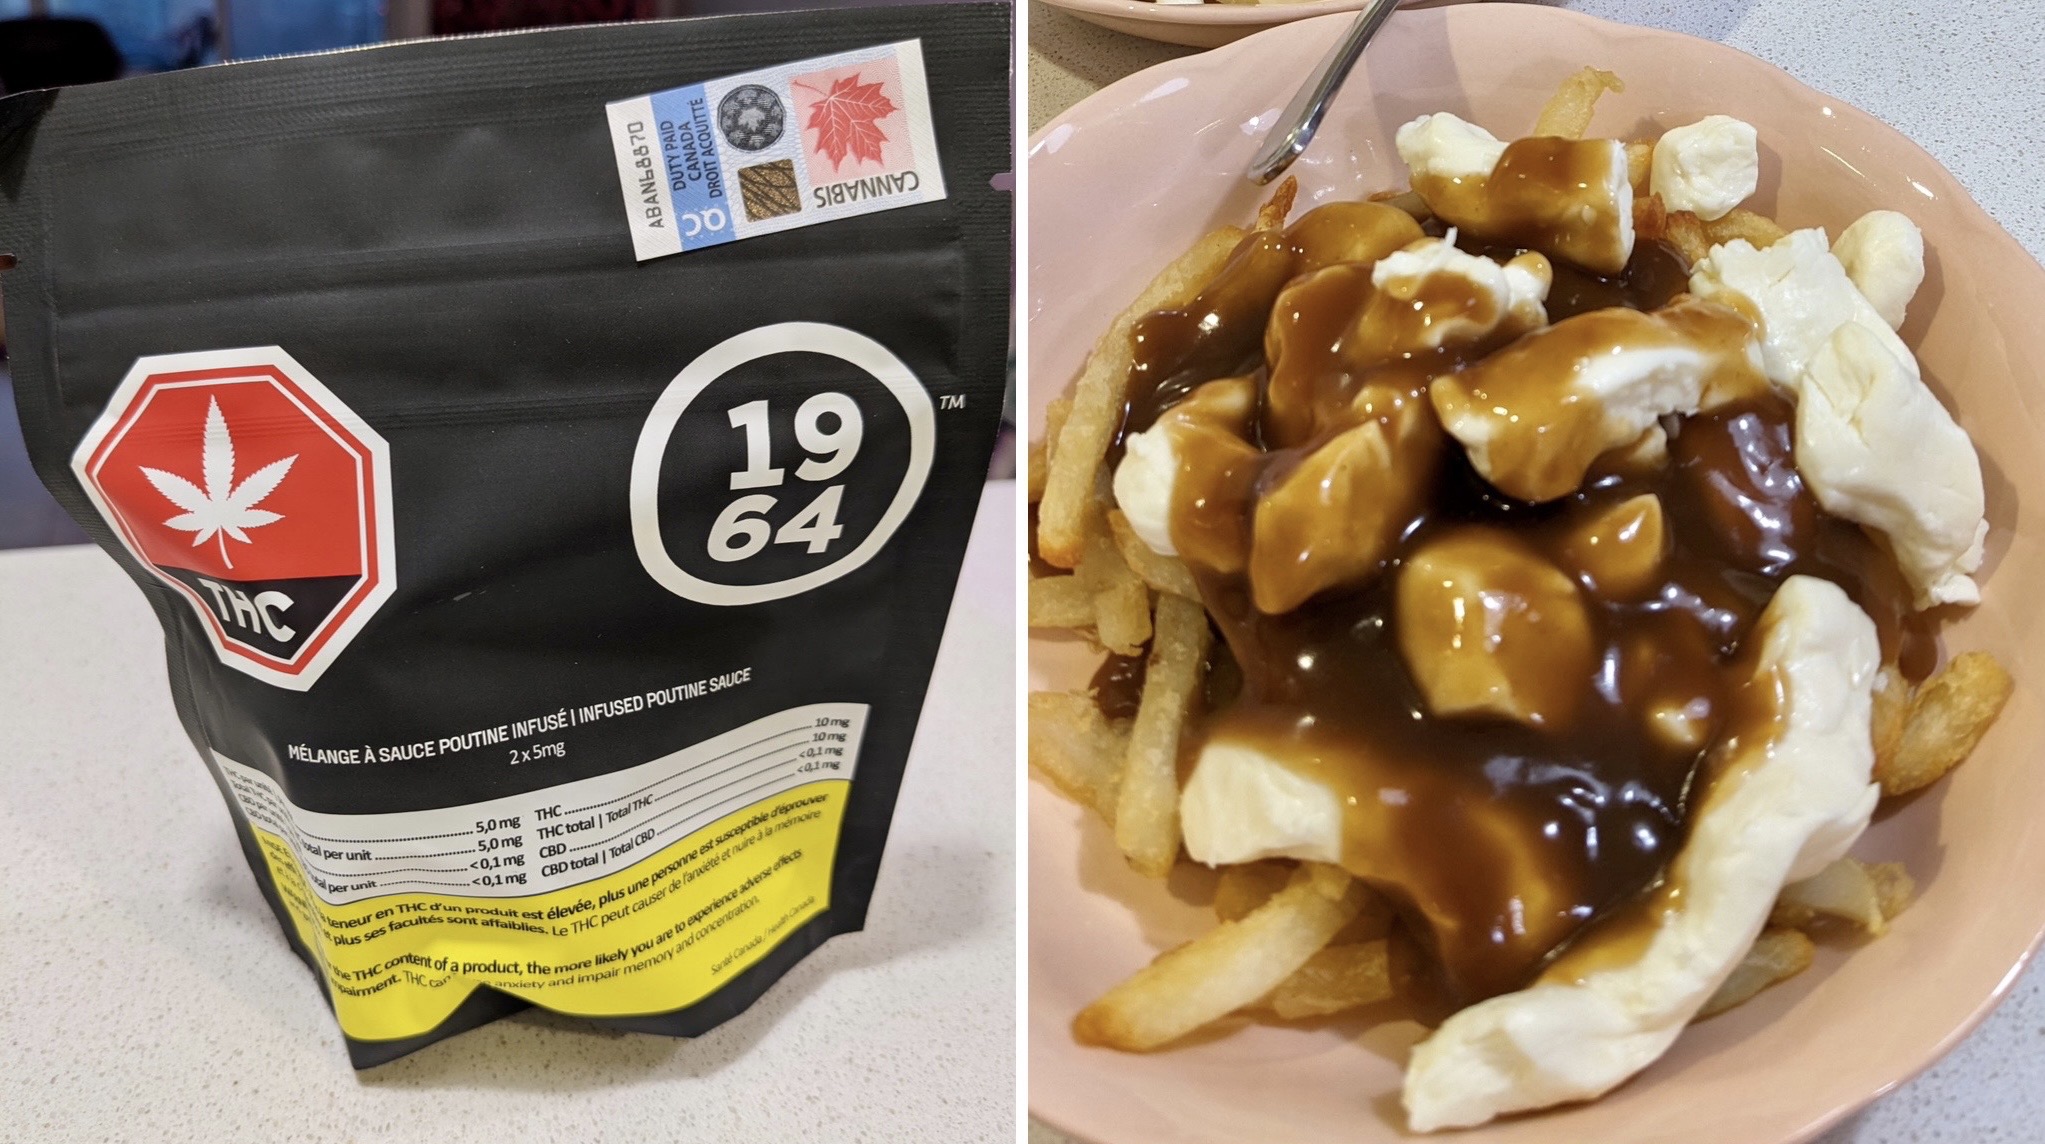 We tried cannabis poutine gravy from the SQDC, possibly the ultimate Quebec edible